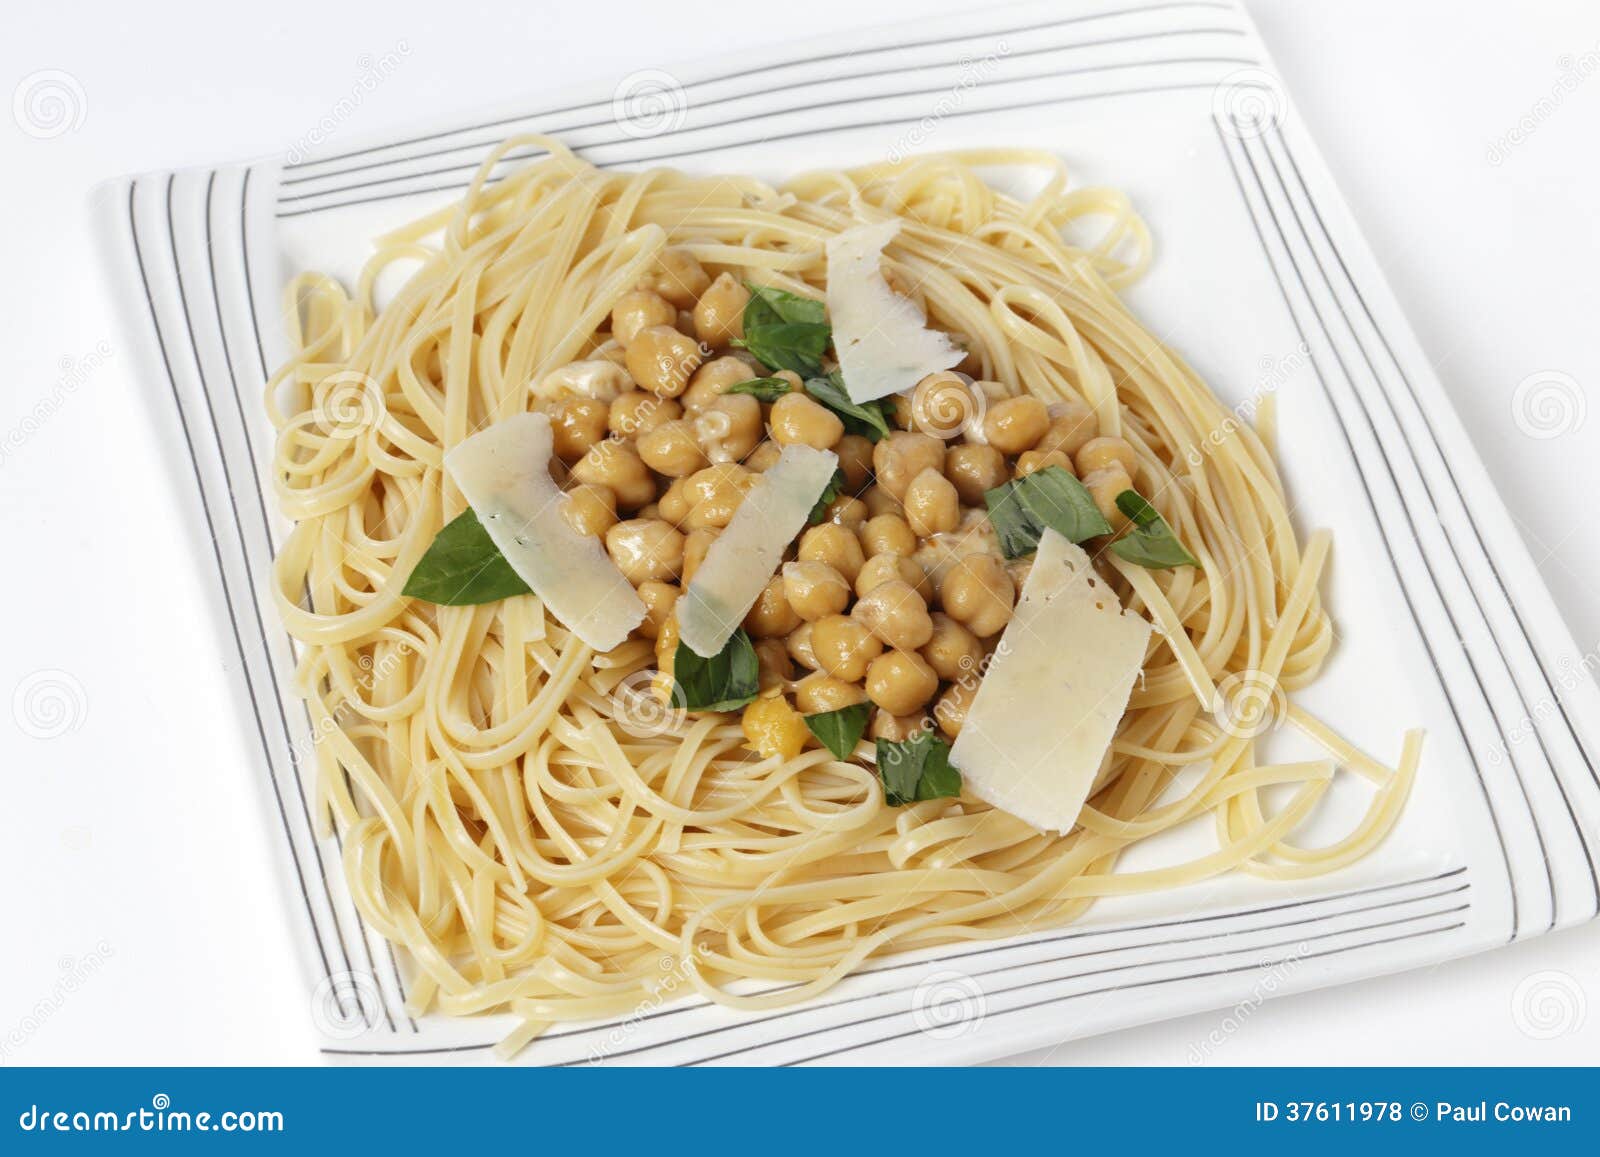 bavette pasta with chickpeas in oil